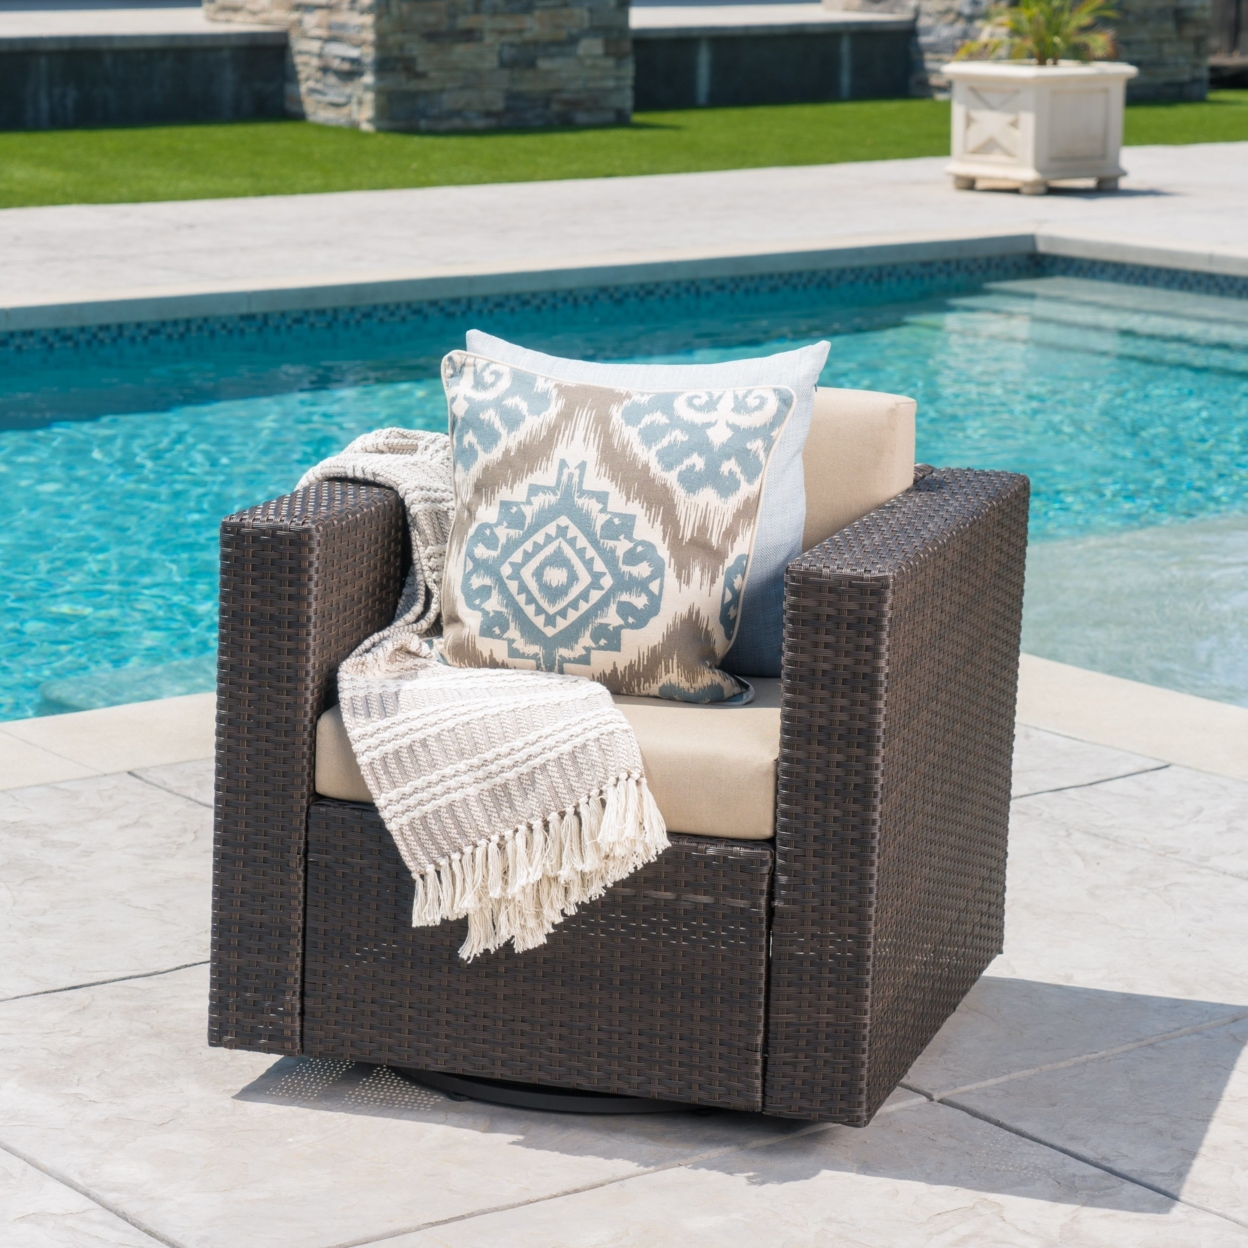 Venice Outdoor Wicker Swivel Club Chair With Water Resistant Cushions - Mix Black/dark Gray, Set Of 2